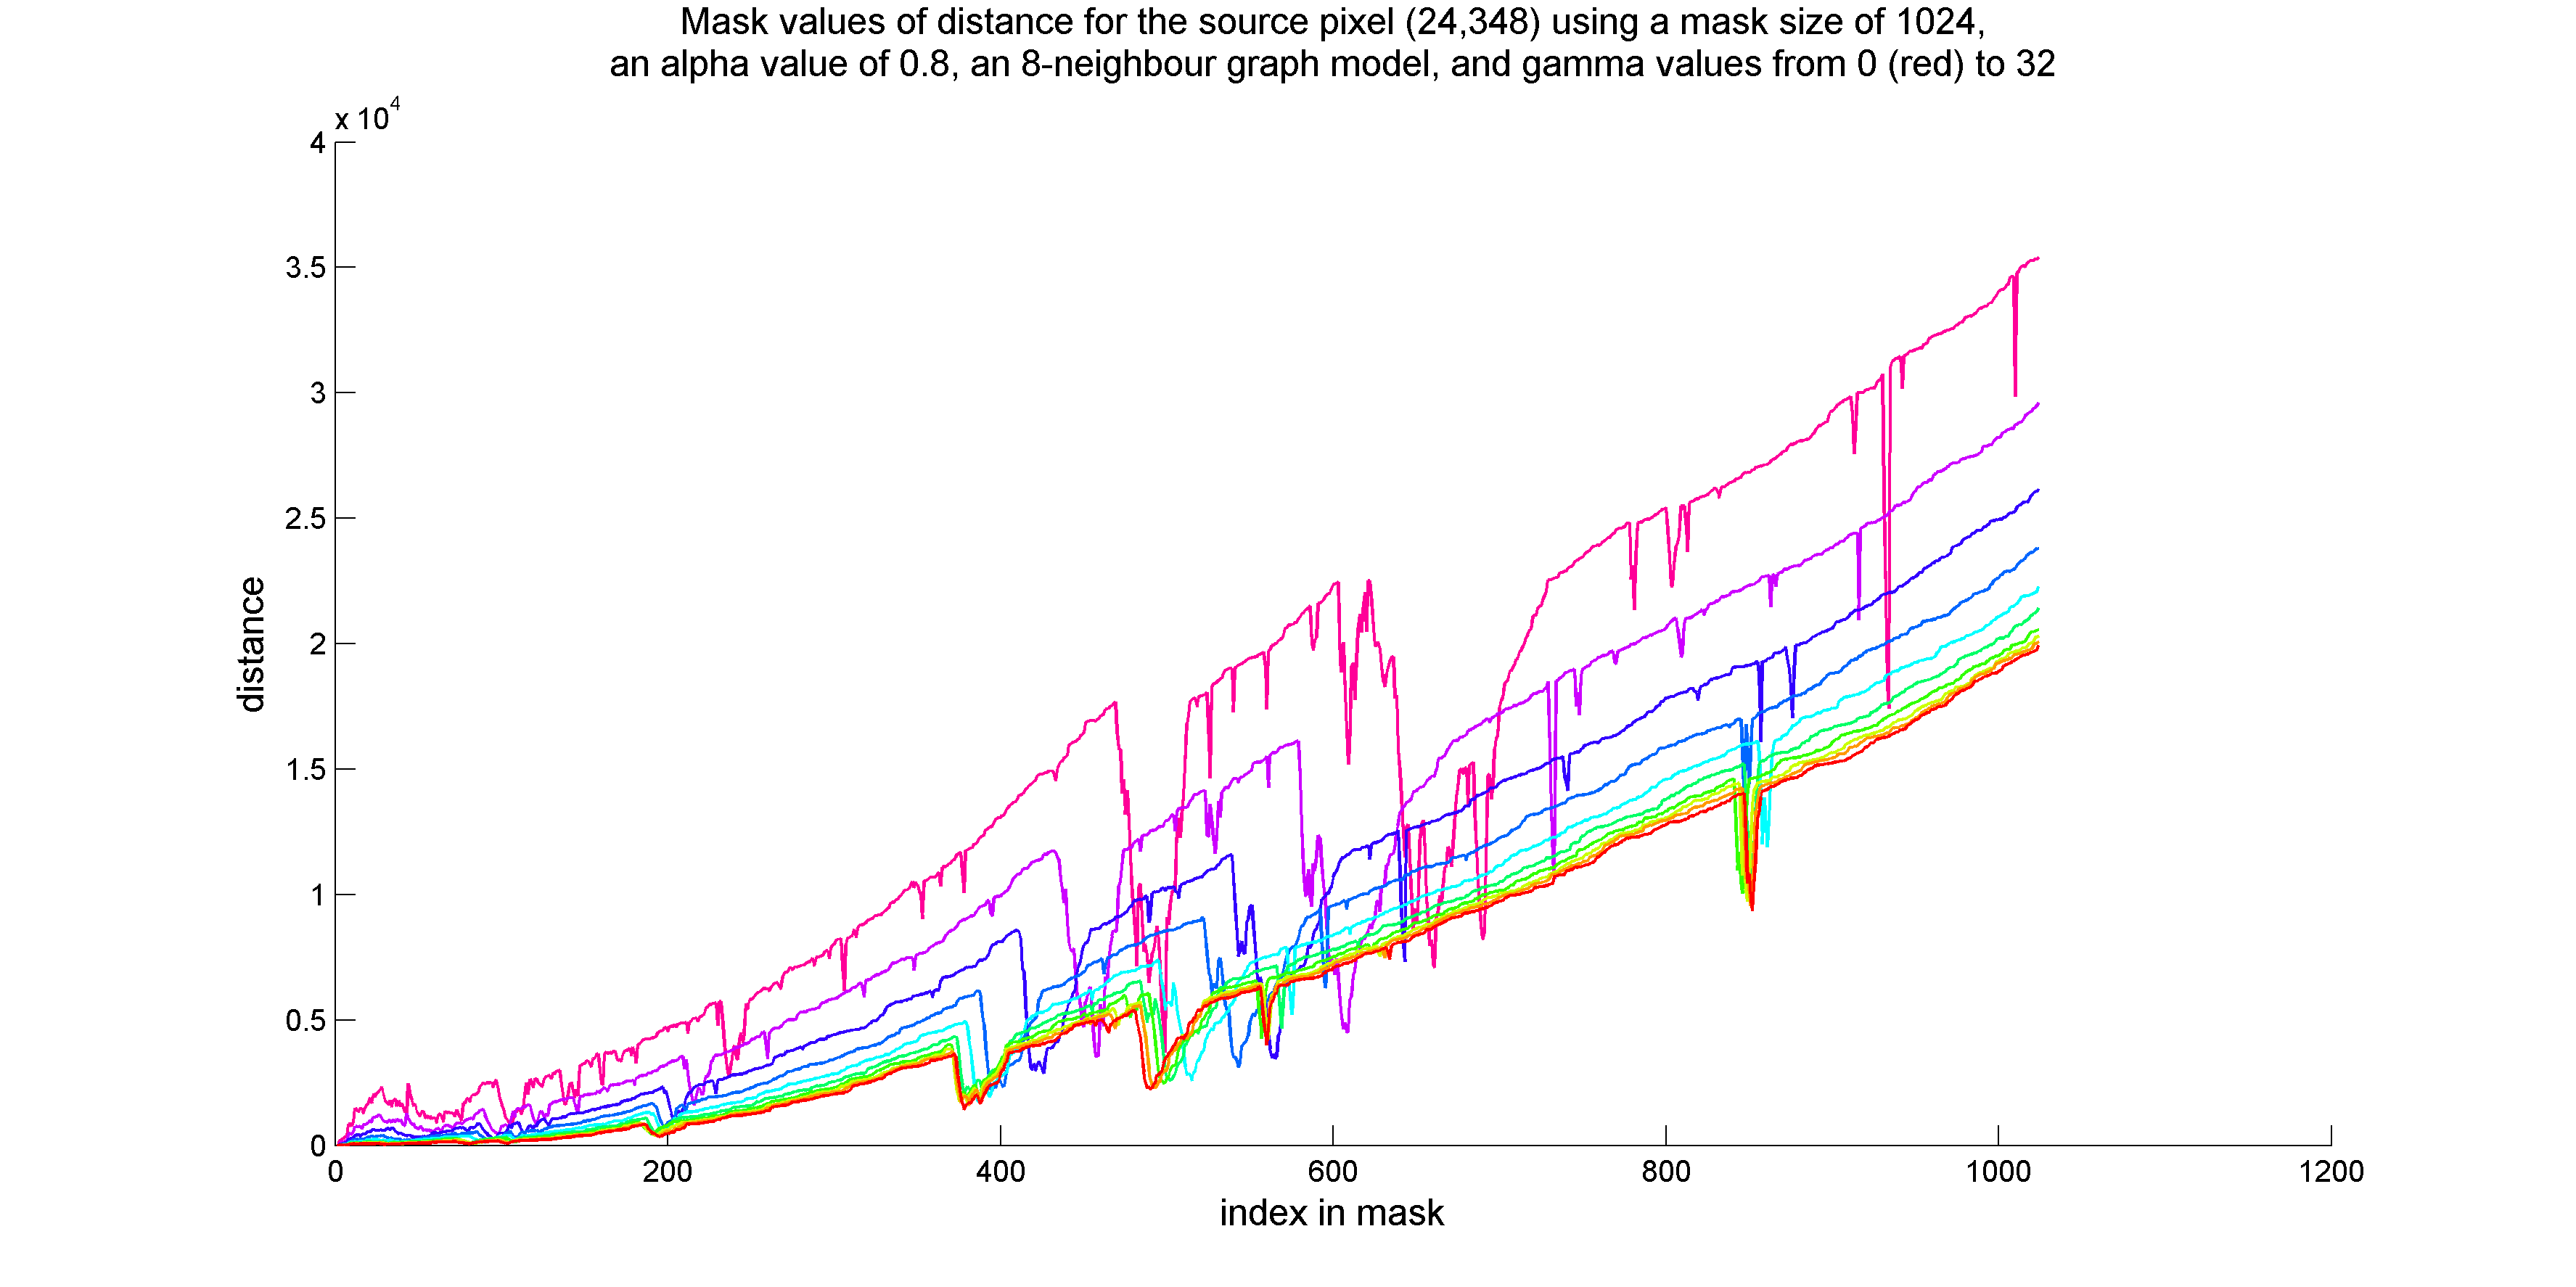  Plot of distances vs. mask index at various gamma parameter values, for an alpha parameter value of 0.8. The source pixel for the mask is at row 24, column 348